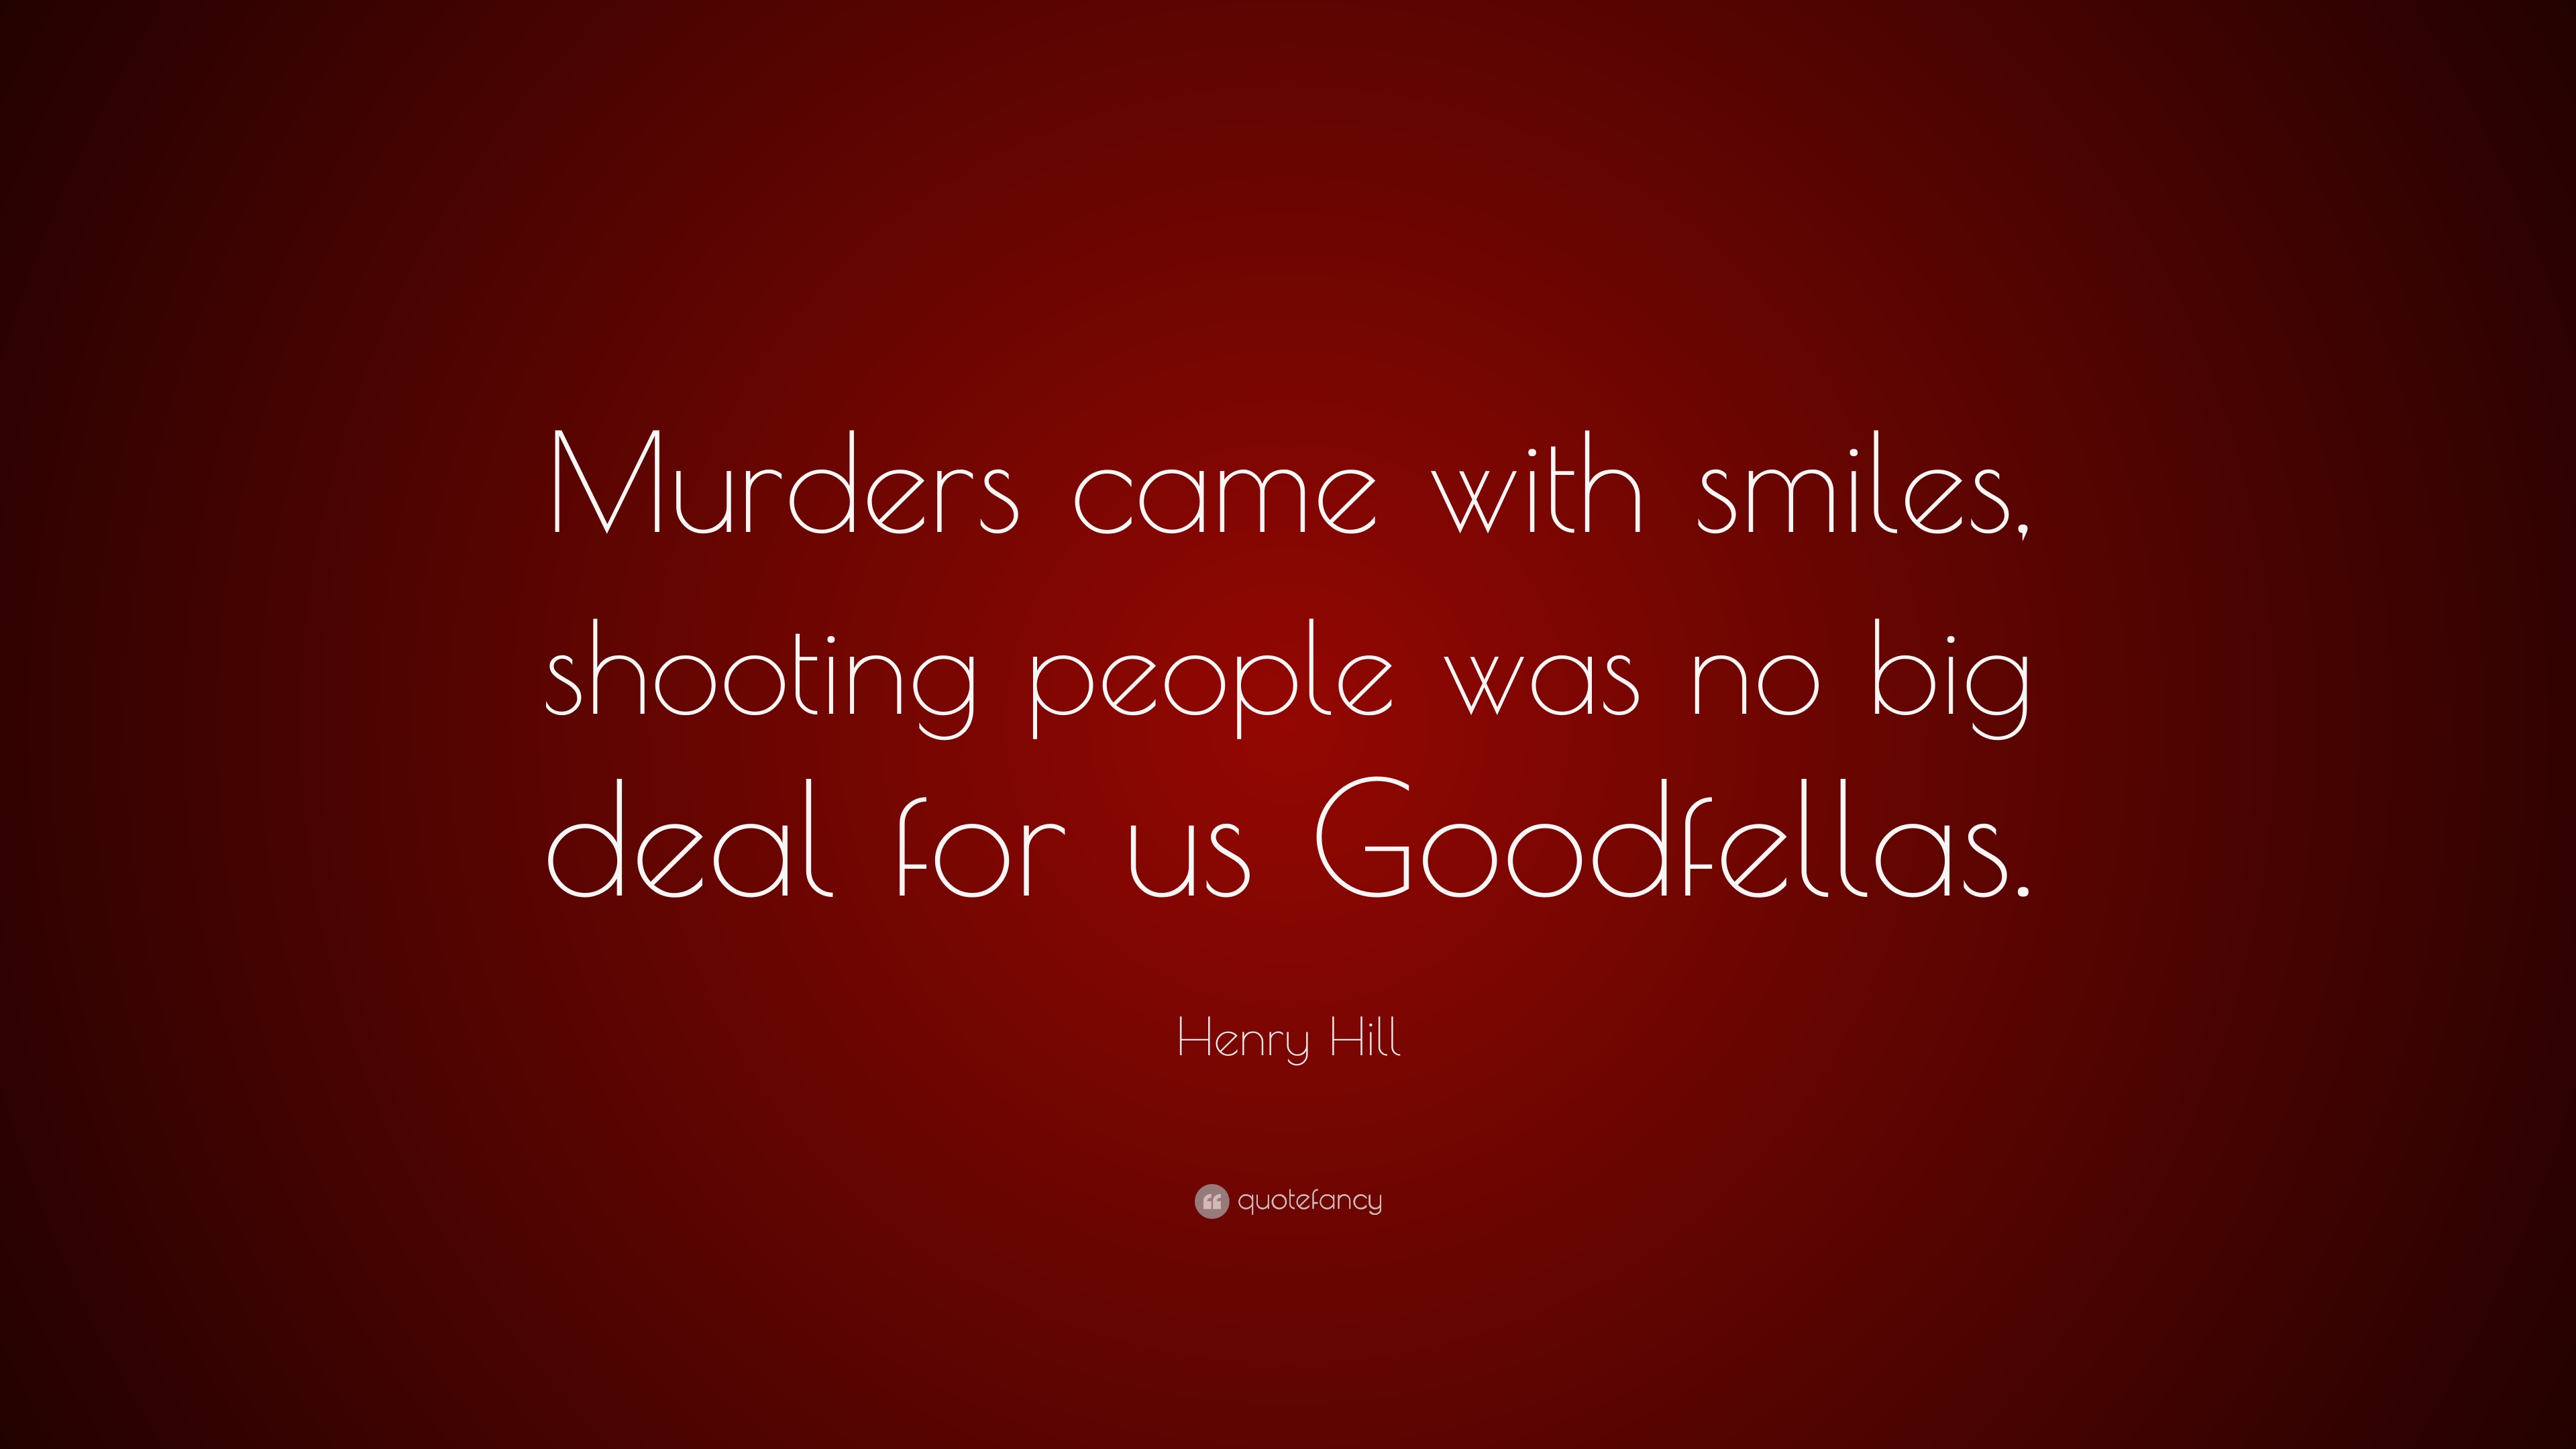 Henry hill quote âmurders came with smiles shooting people was no big deal for us goodfellasâ